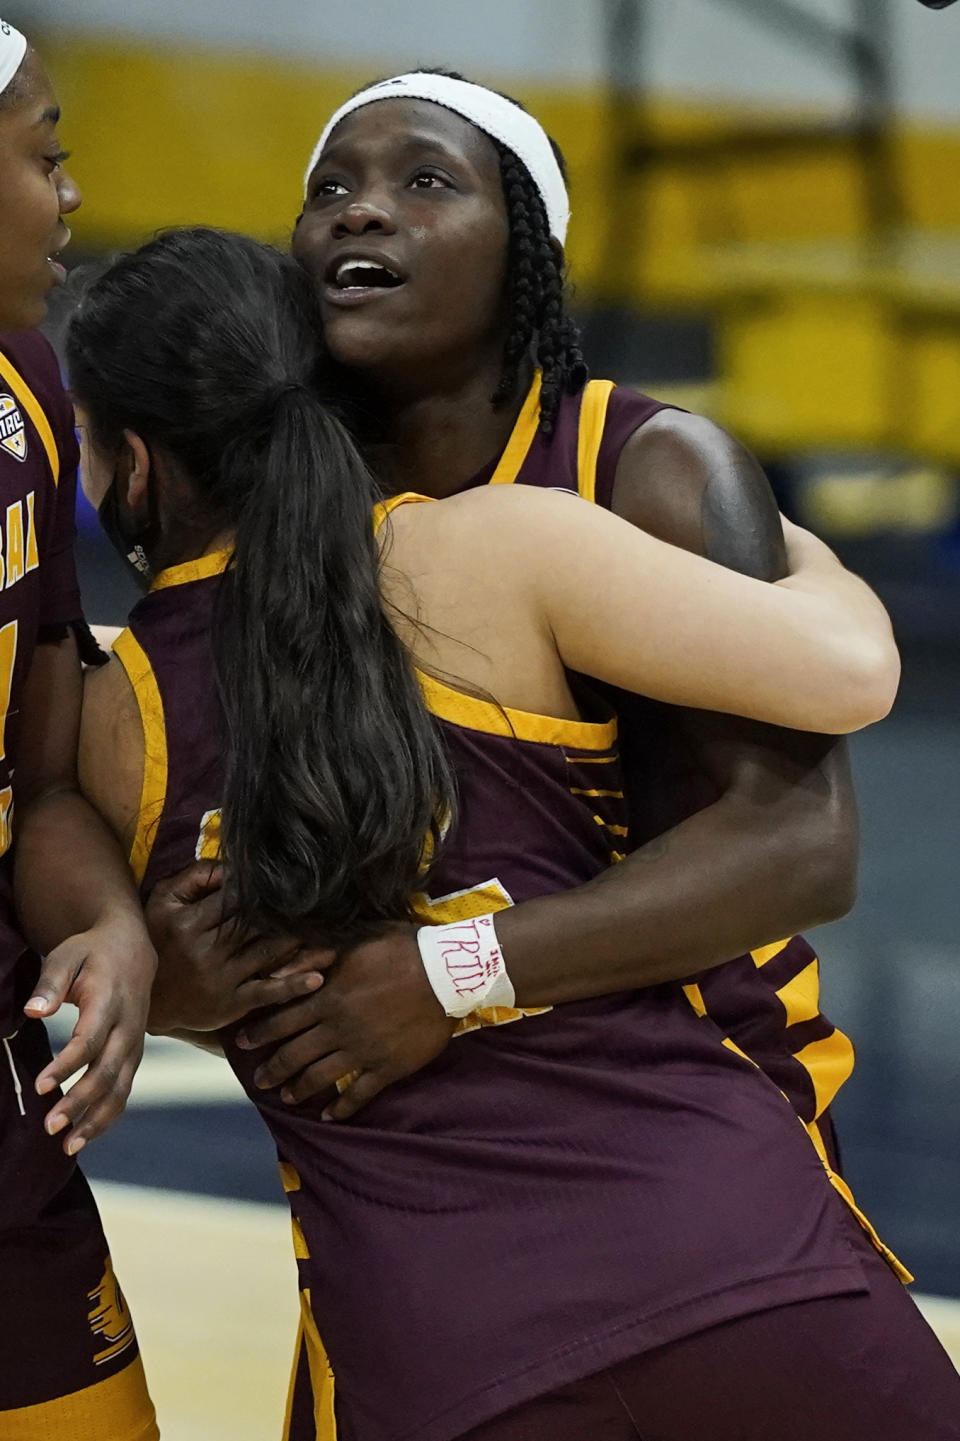 Central Michigan's Micaela Kelly is hugged by a teammate after they defeated Bowling Green 77-72 in an NCAA college basketball game in the championship of the Mid-American Conference tournament, Saturday, March 13, 2021, in Cleveland. (AP Photo/Tony Dejak)